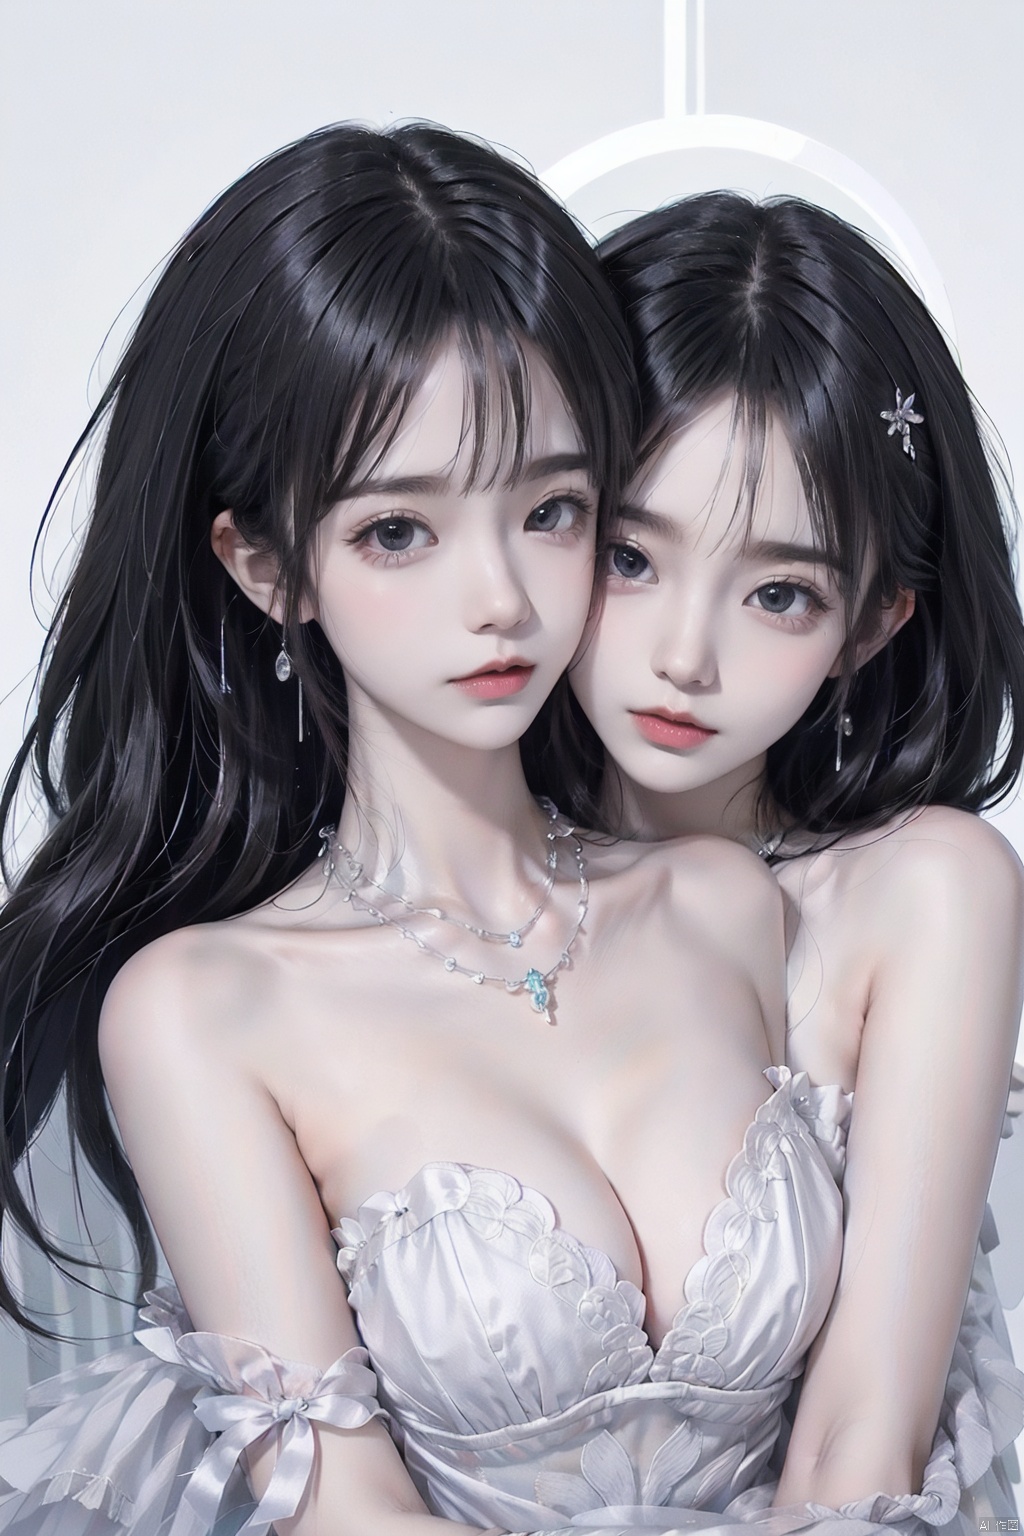  2 girls hugging and kissing, pink jk
 Breasts, , white background , simple background
, Black straight hair, 
, cleavage, bare shoulders,
 Jewellery, Medium Breasts,
Collarbone,
 Necklace, Strapless 
Moles, Lips
 Strapless 
Moles on breasts, Earrings,
, Costume Design,
Illustration, Painting,
